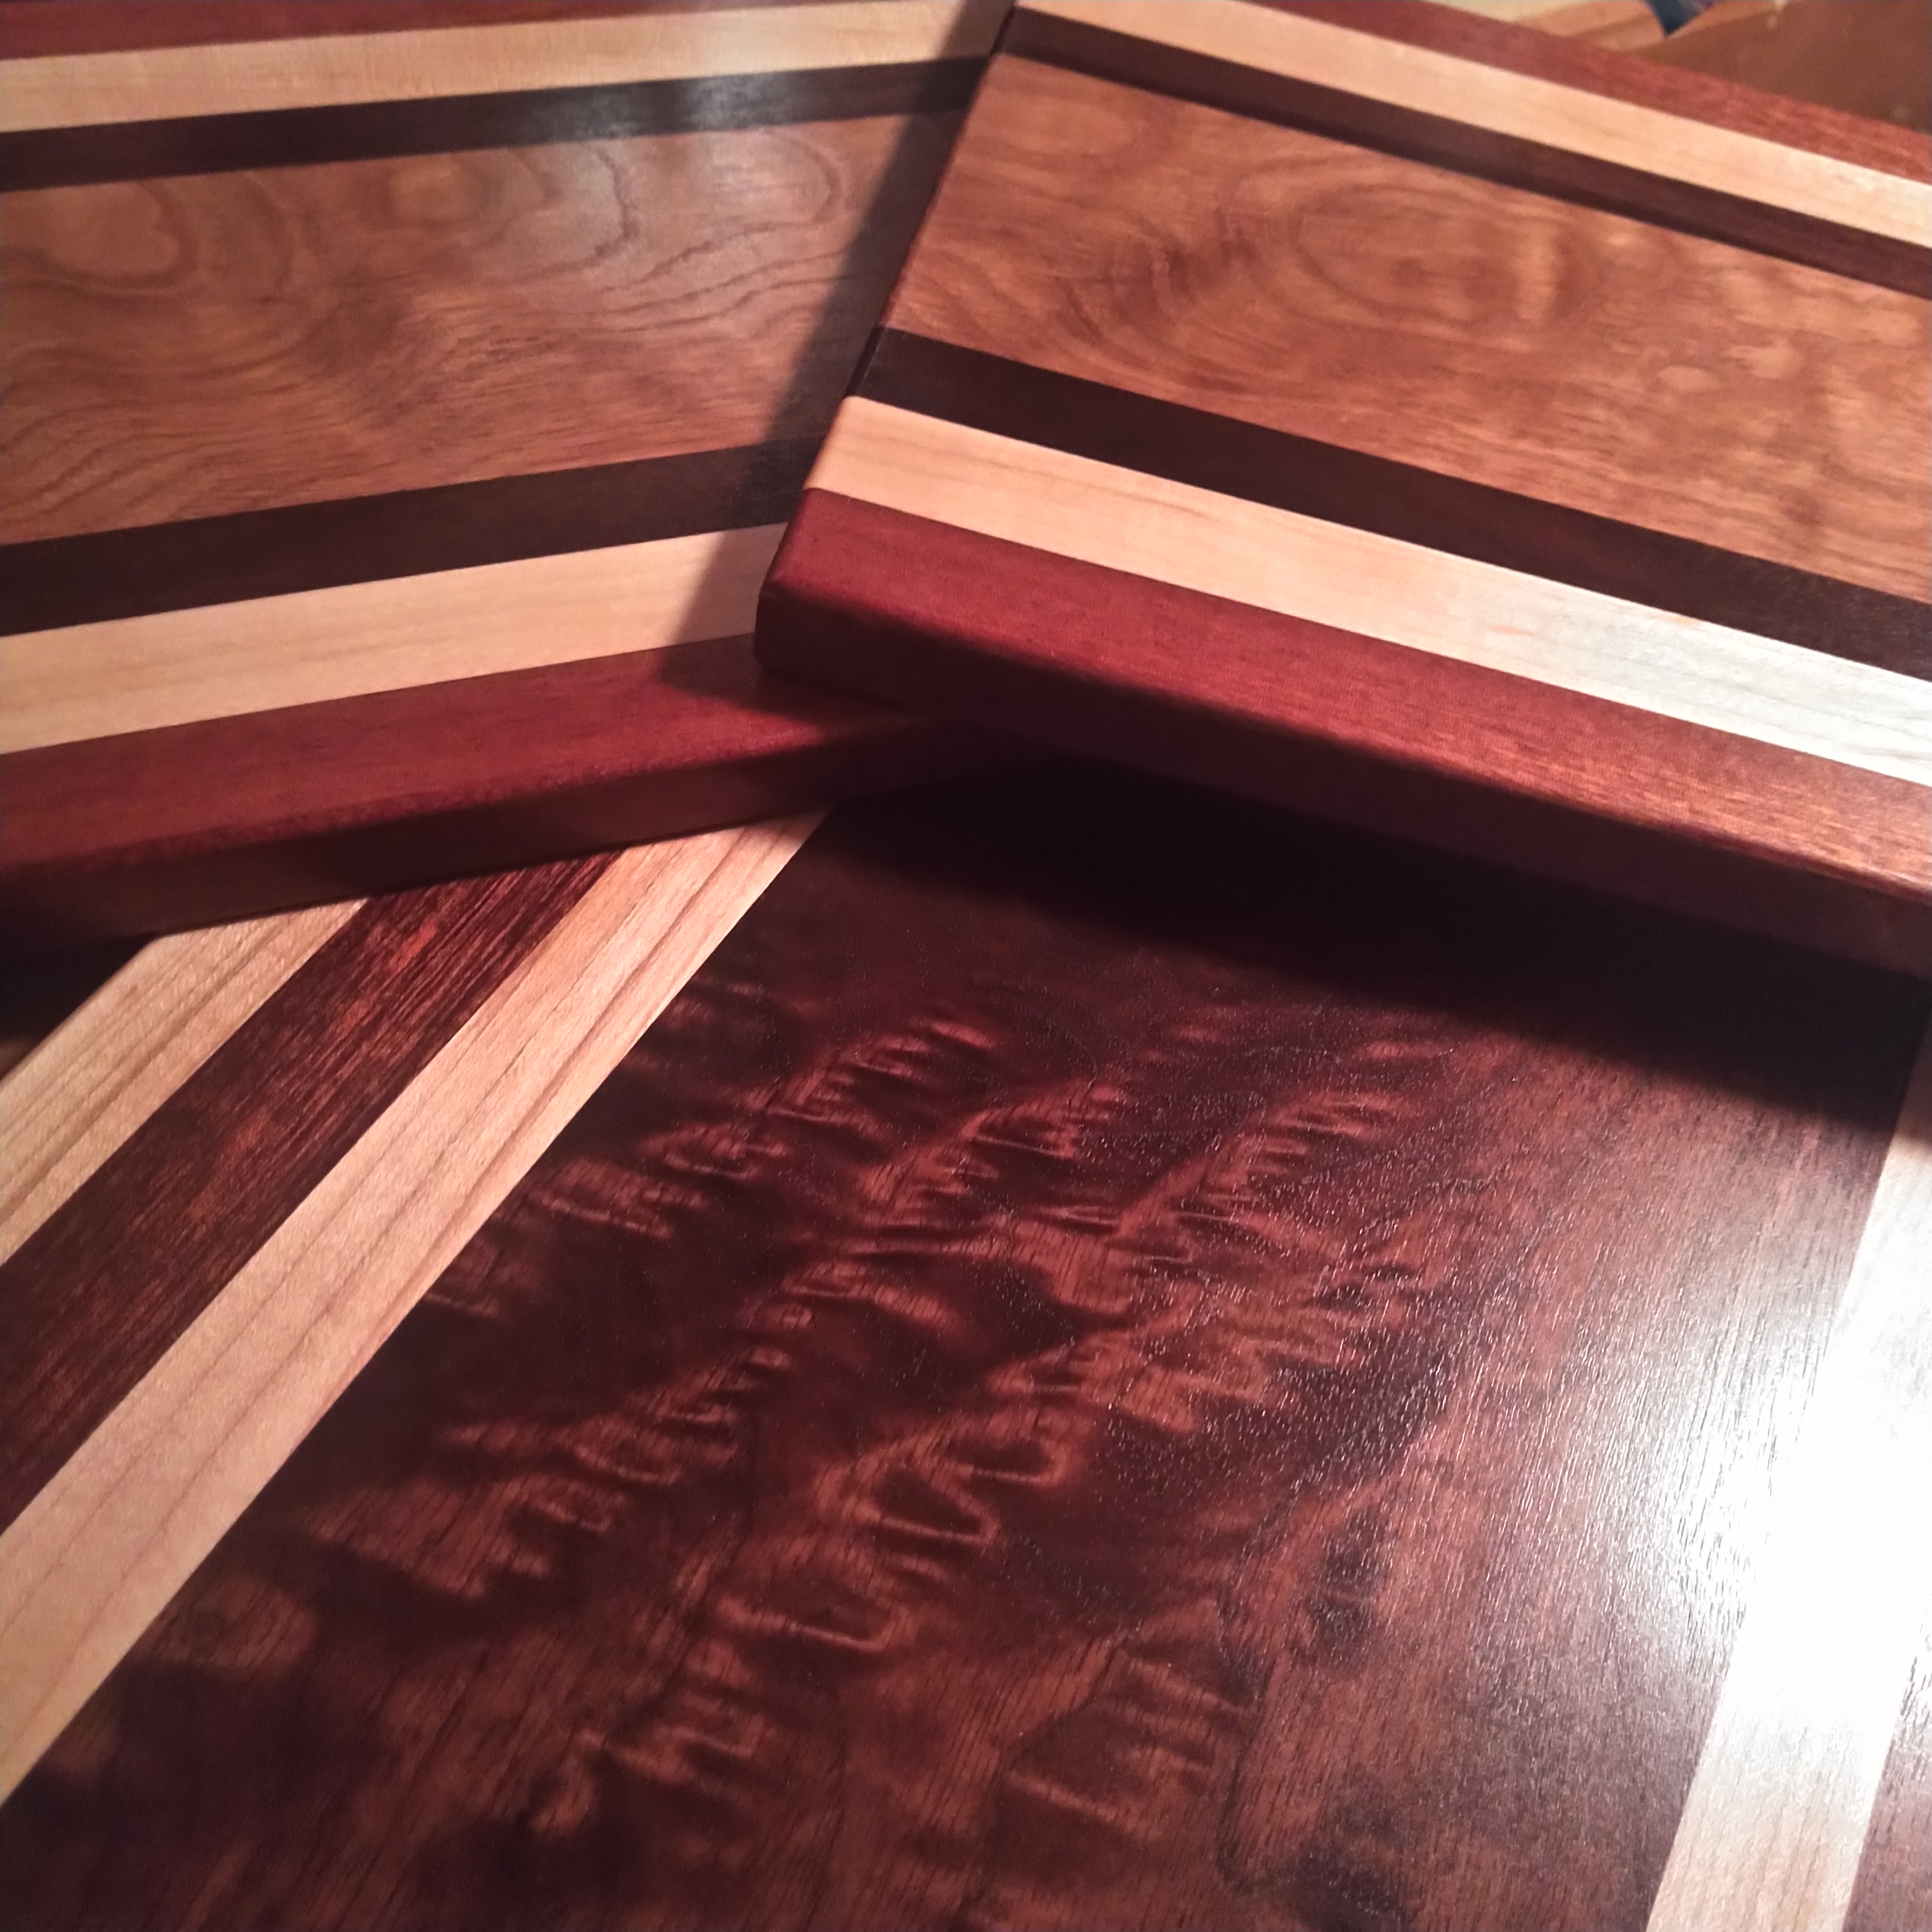 Assorted wooden cutting boards - morgan Angus